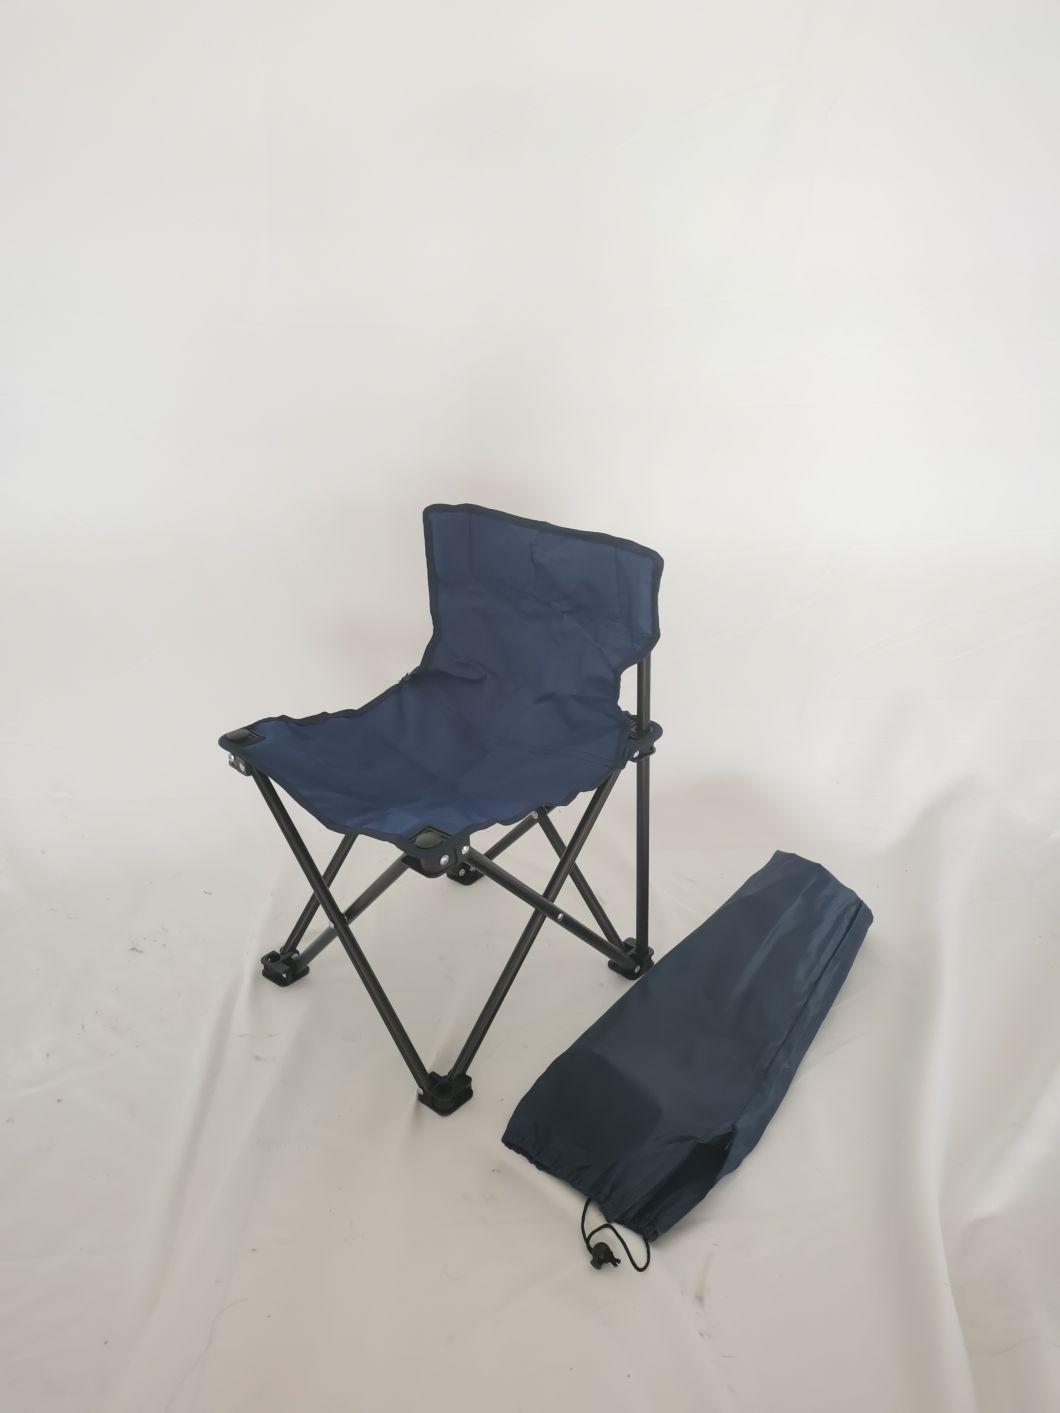 Foldable Relaxing Garden Chair Outdoor Easy Carry Fabric Metal Multi-Colors